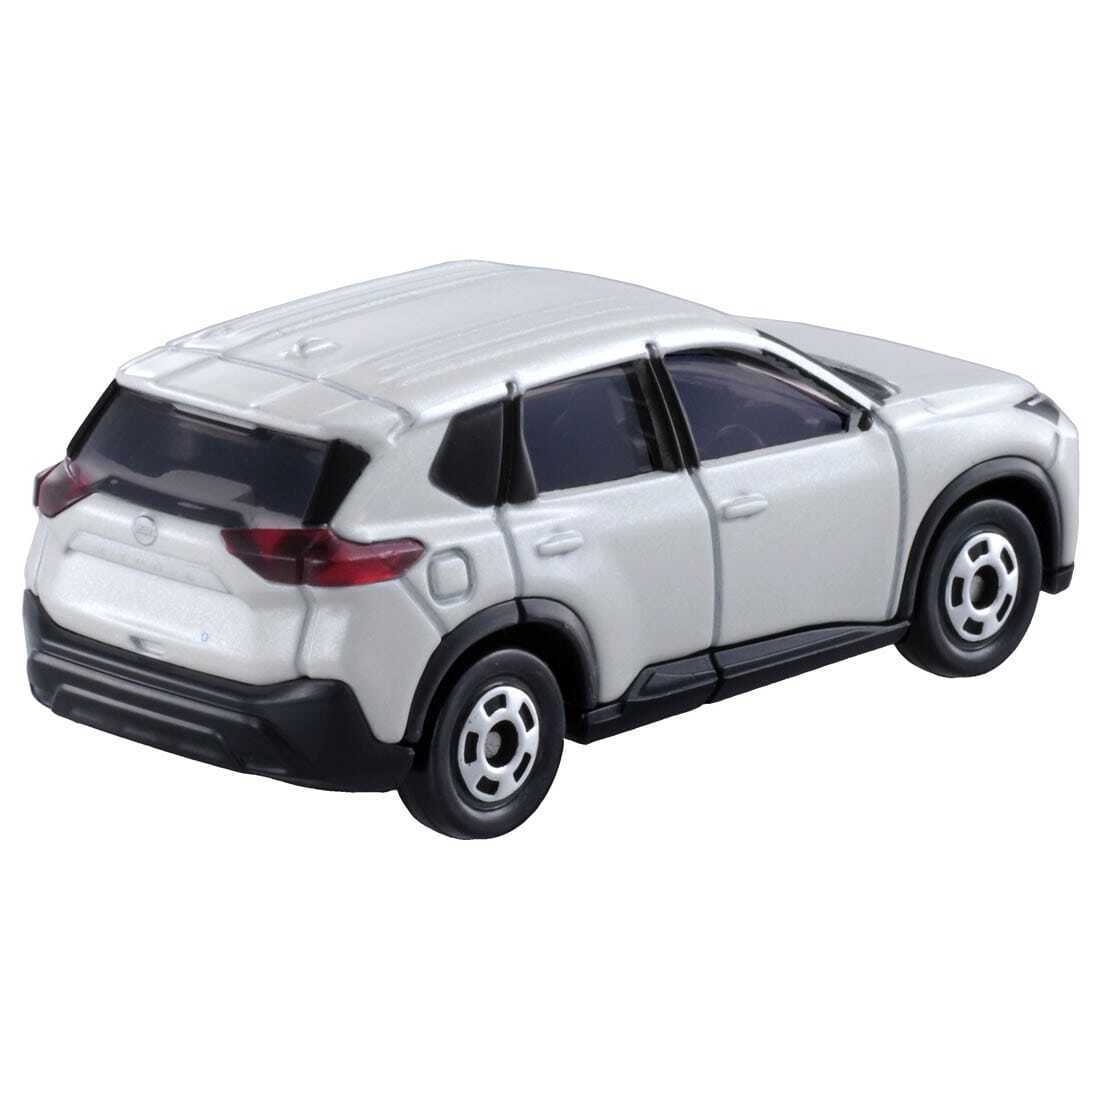 Tomica No.117 Nissan X-Trail (White) - First Edition